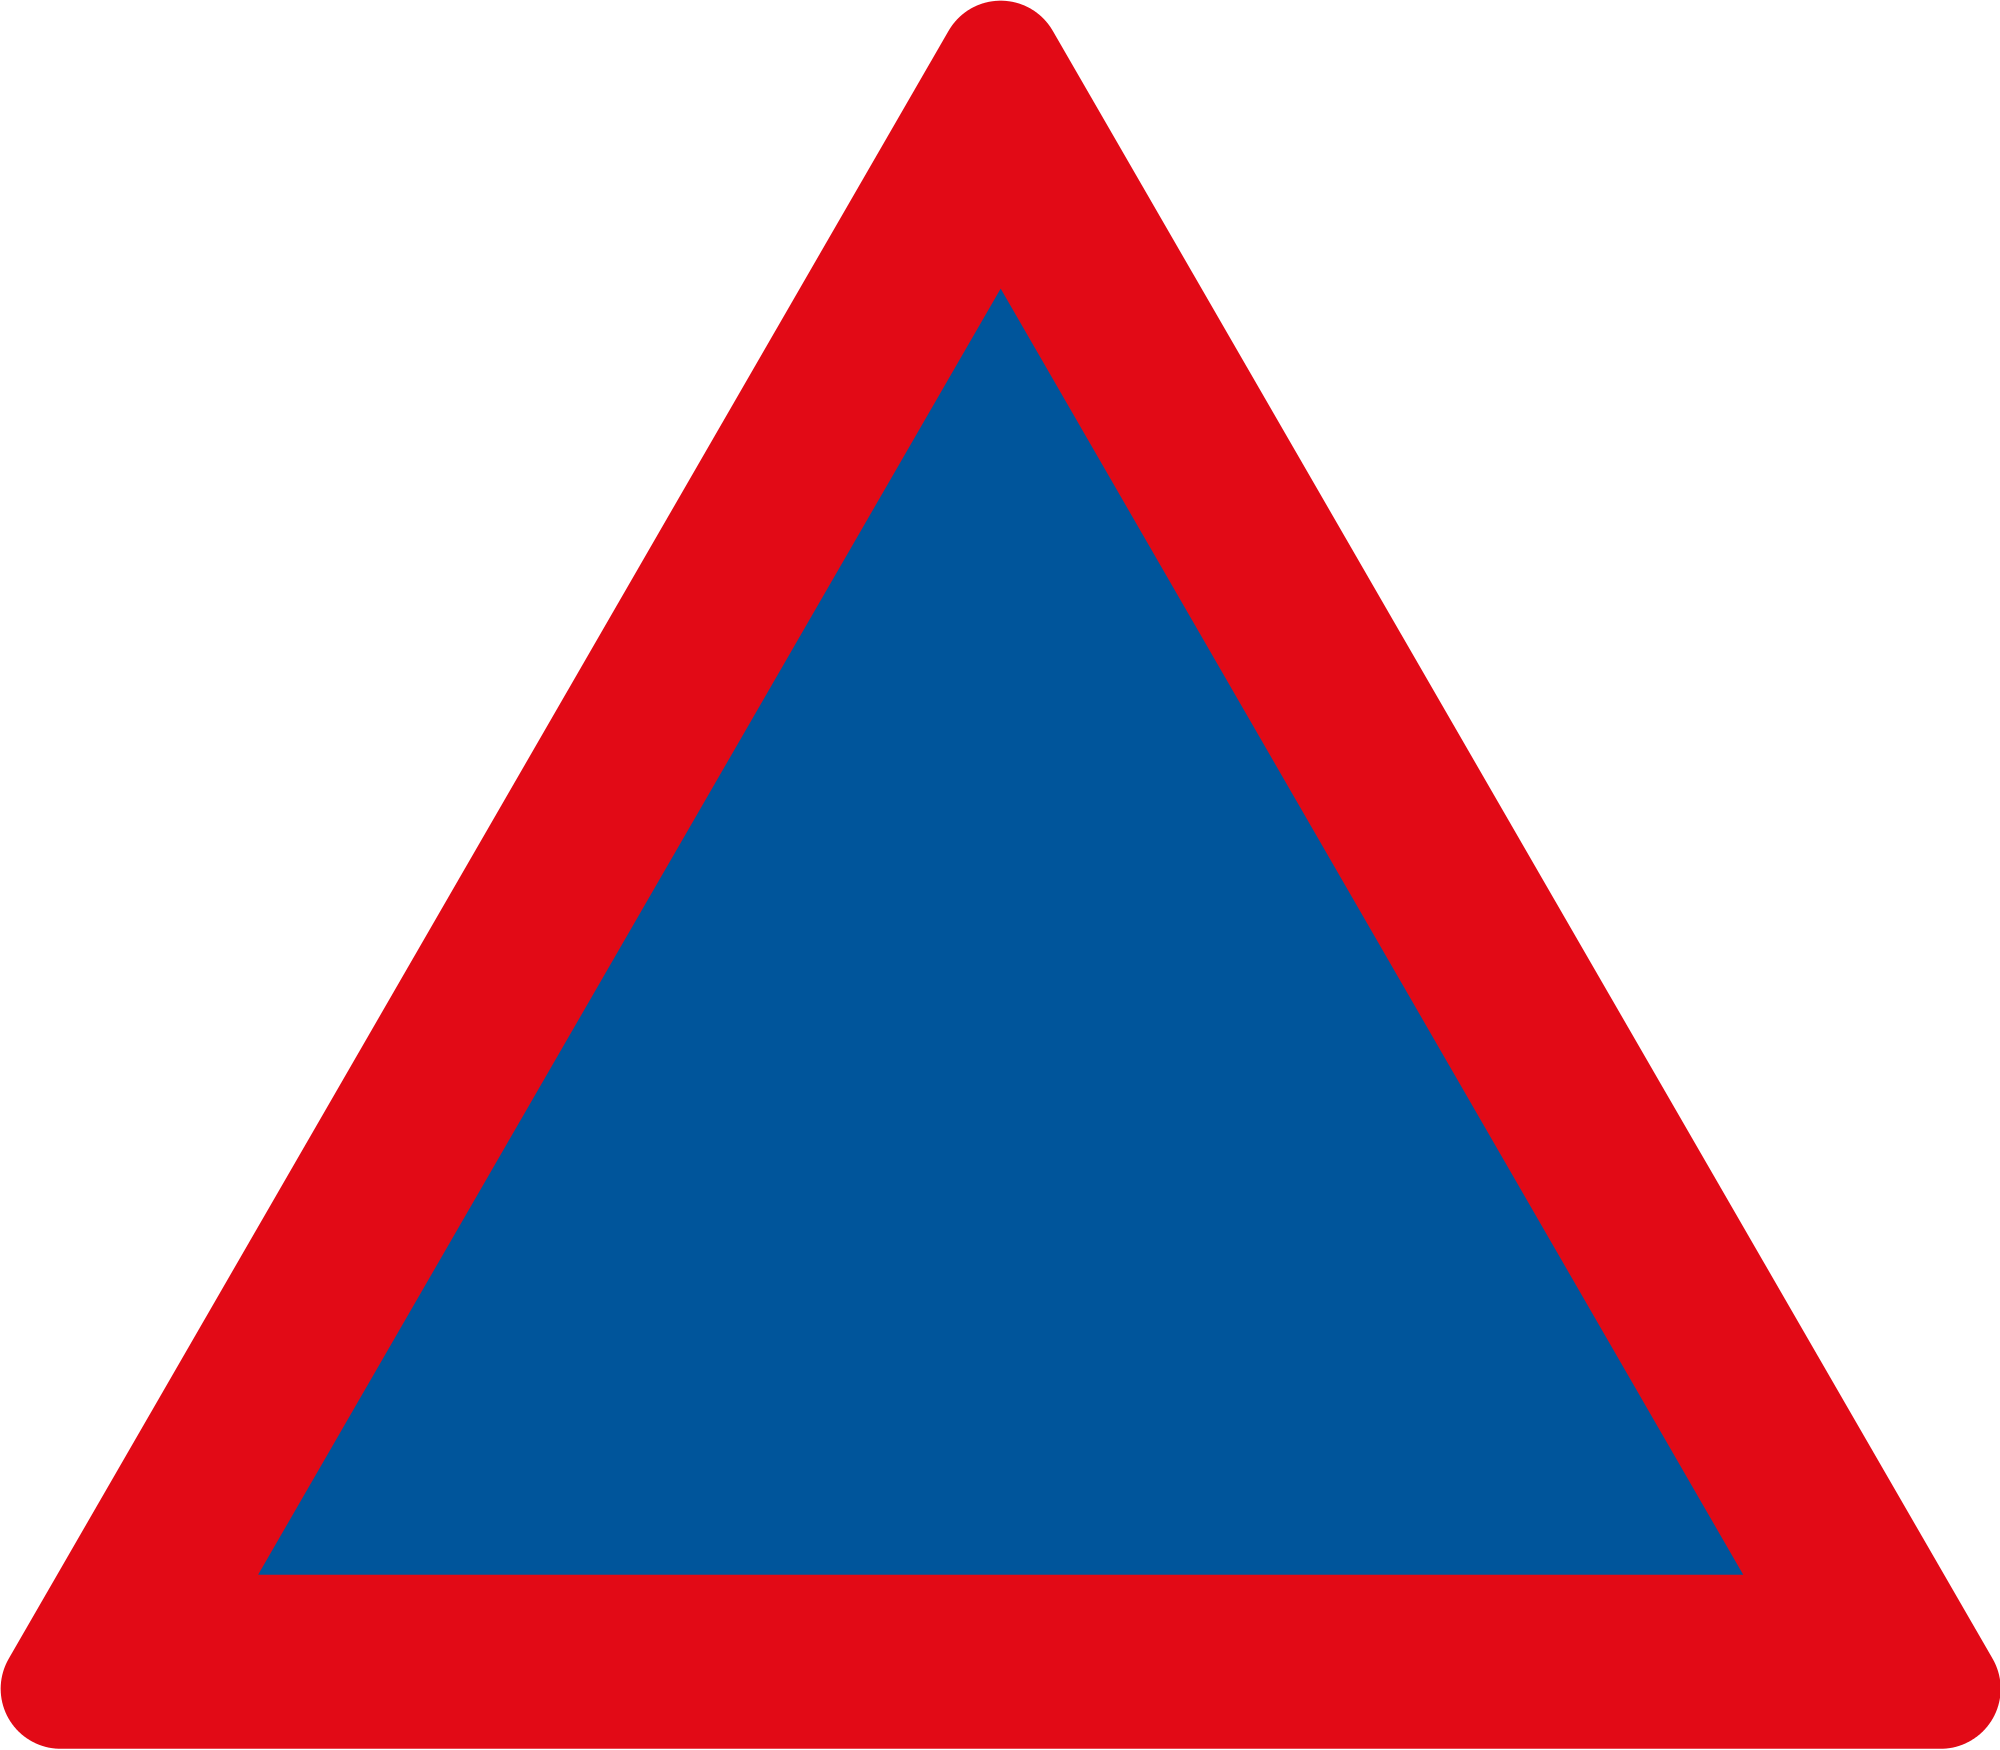 Blue and Red Triangle Logo - File:Triangle warning sign (red and blue).svg - Wikimedia Commons